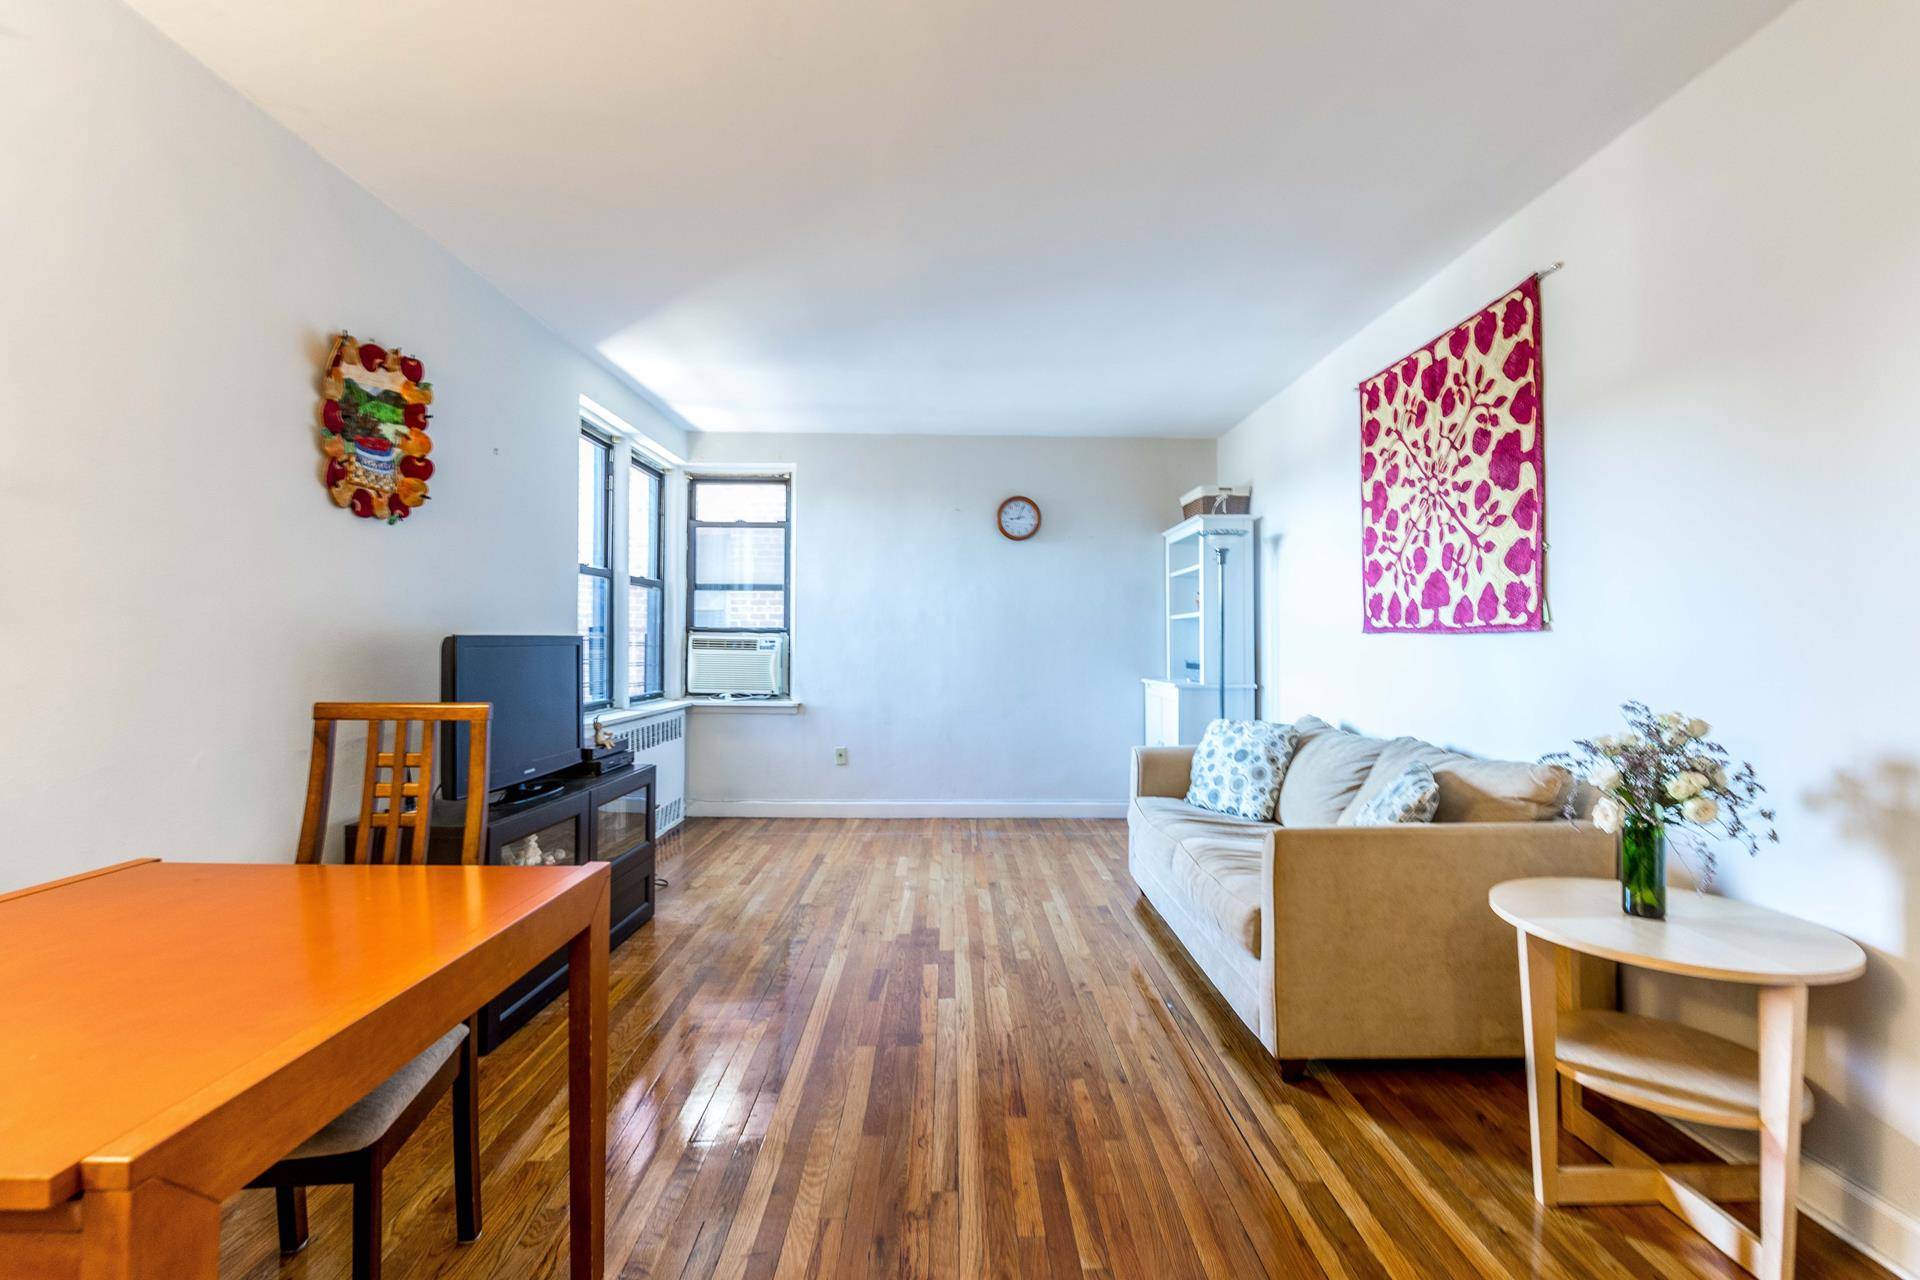 Located in the heart of Rego Park, this 2 bedroom 1 bath Co Op features a bright living room and dining area, newly renovated kitchen with quartz countertops, stainless appliances ...